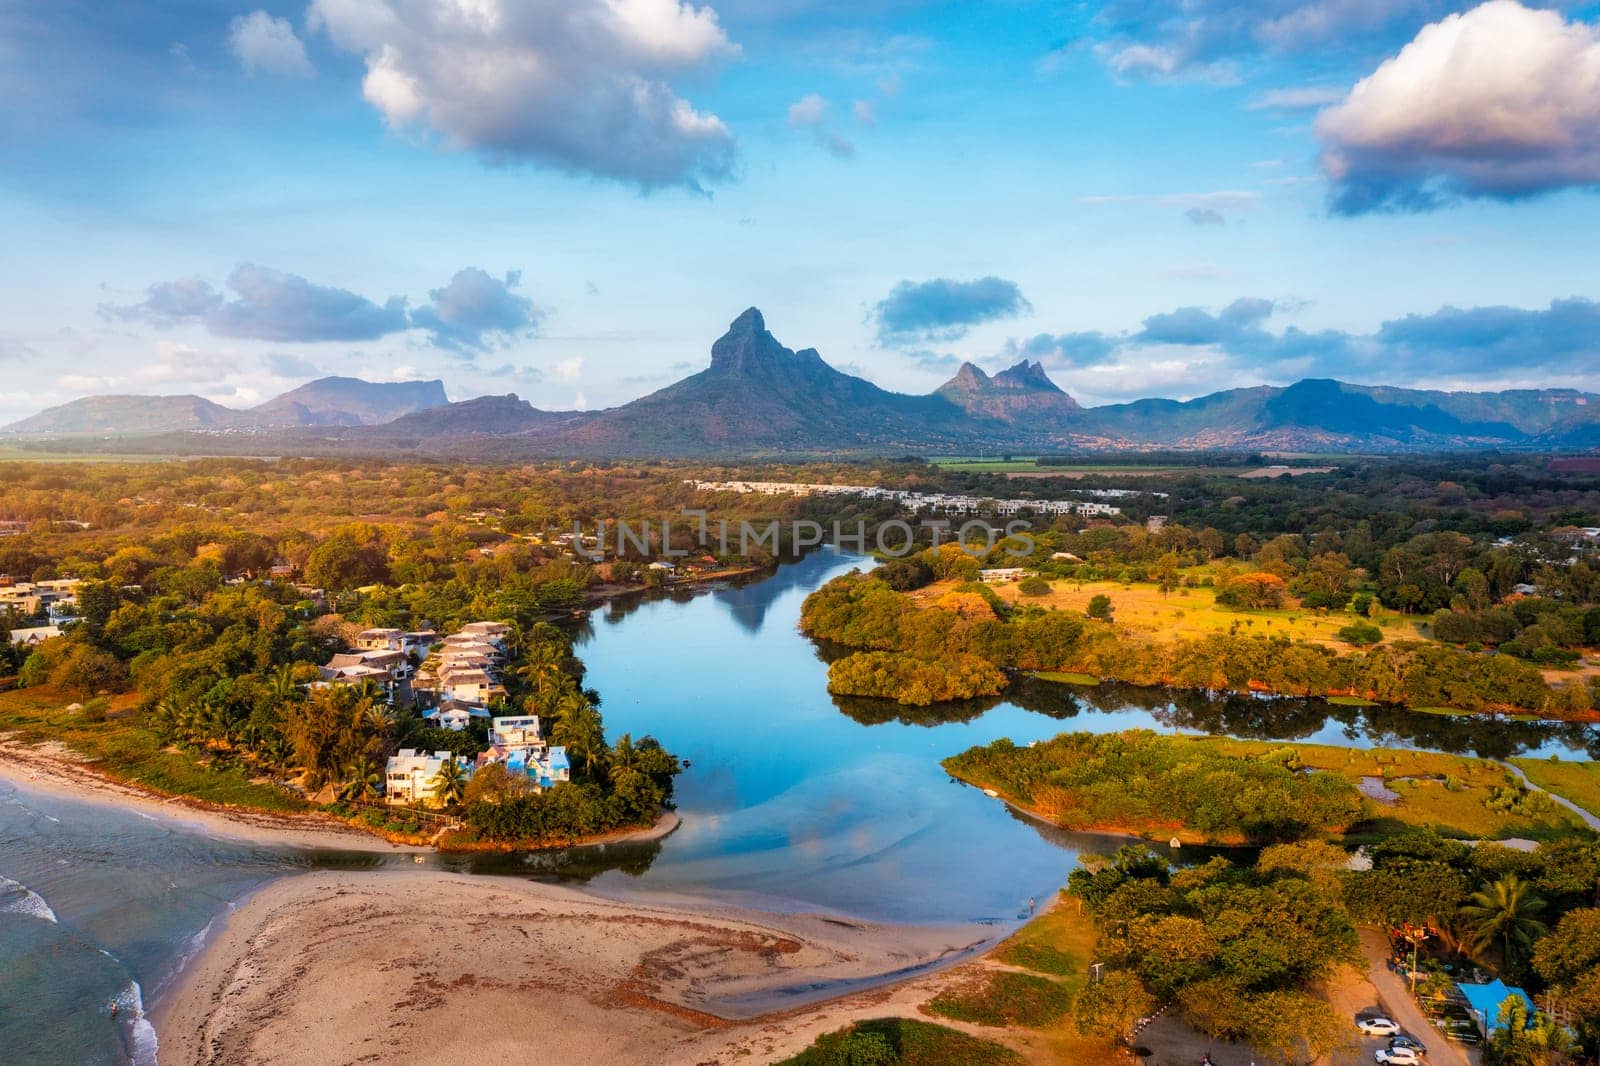 Rempart mountain view from Tamarin bay, Black river, scenic nature of Mauritius island. Beautiful nature and landscapes of Mauritius island. Rempart mountains view from Tamarin bay, Mauritius. by DaLiu